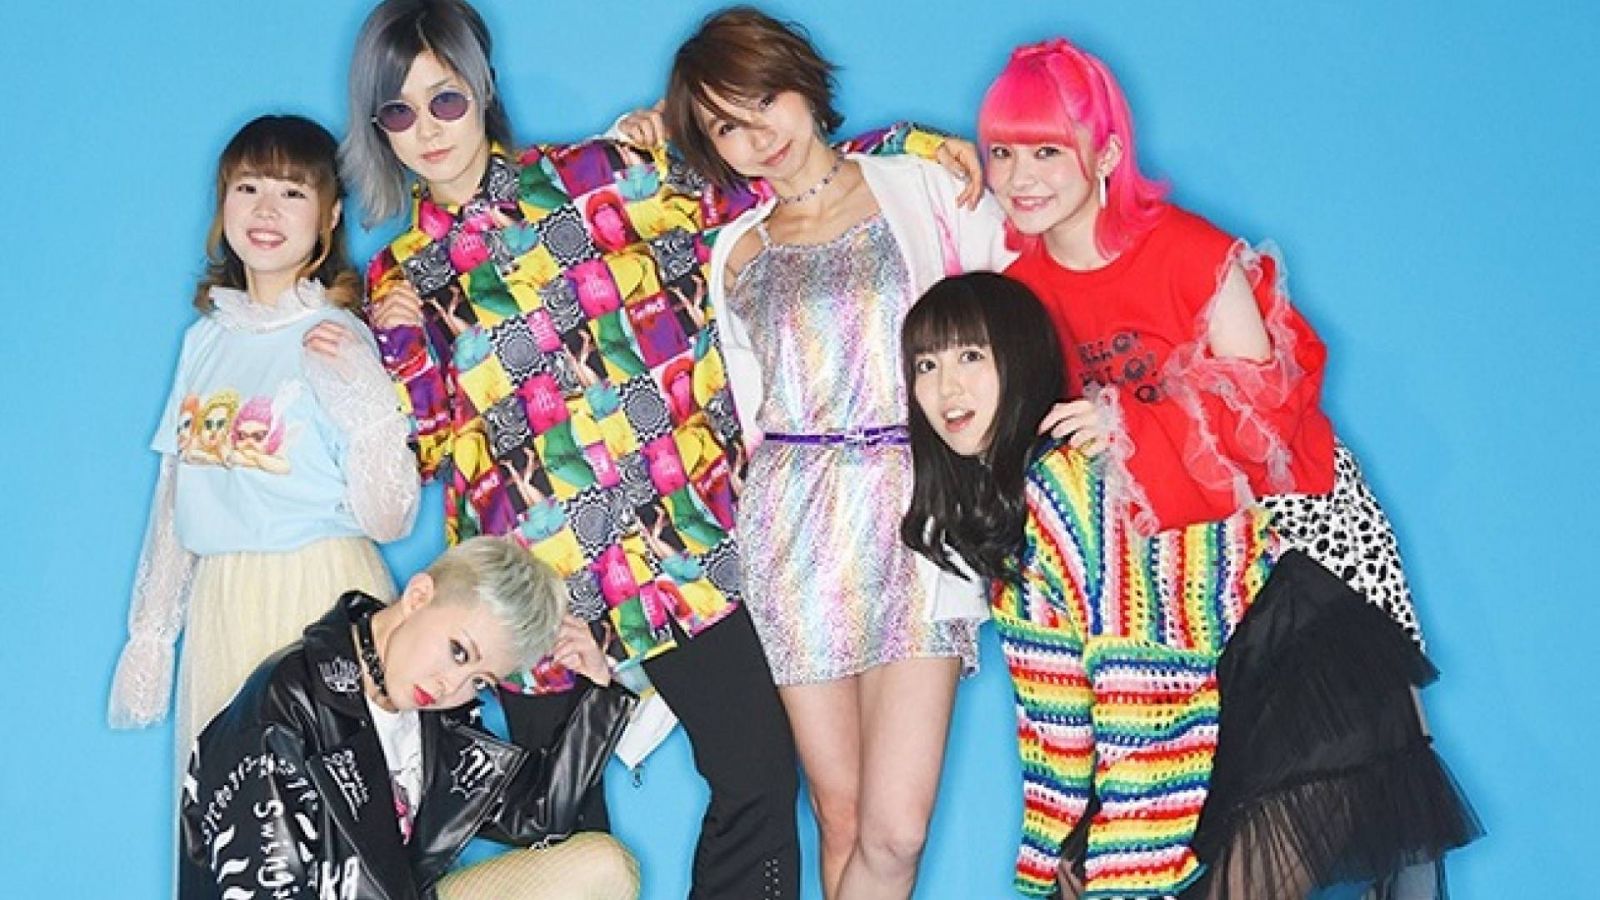 New Drummer Joins Gacharic Spin © Gacharic Spin